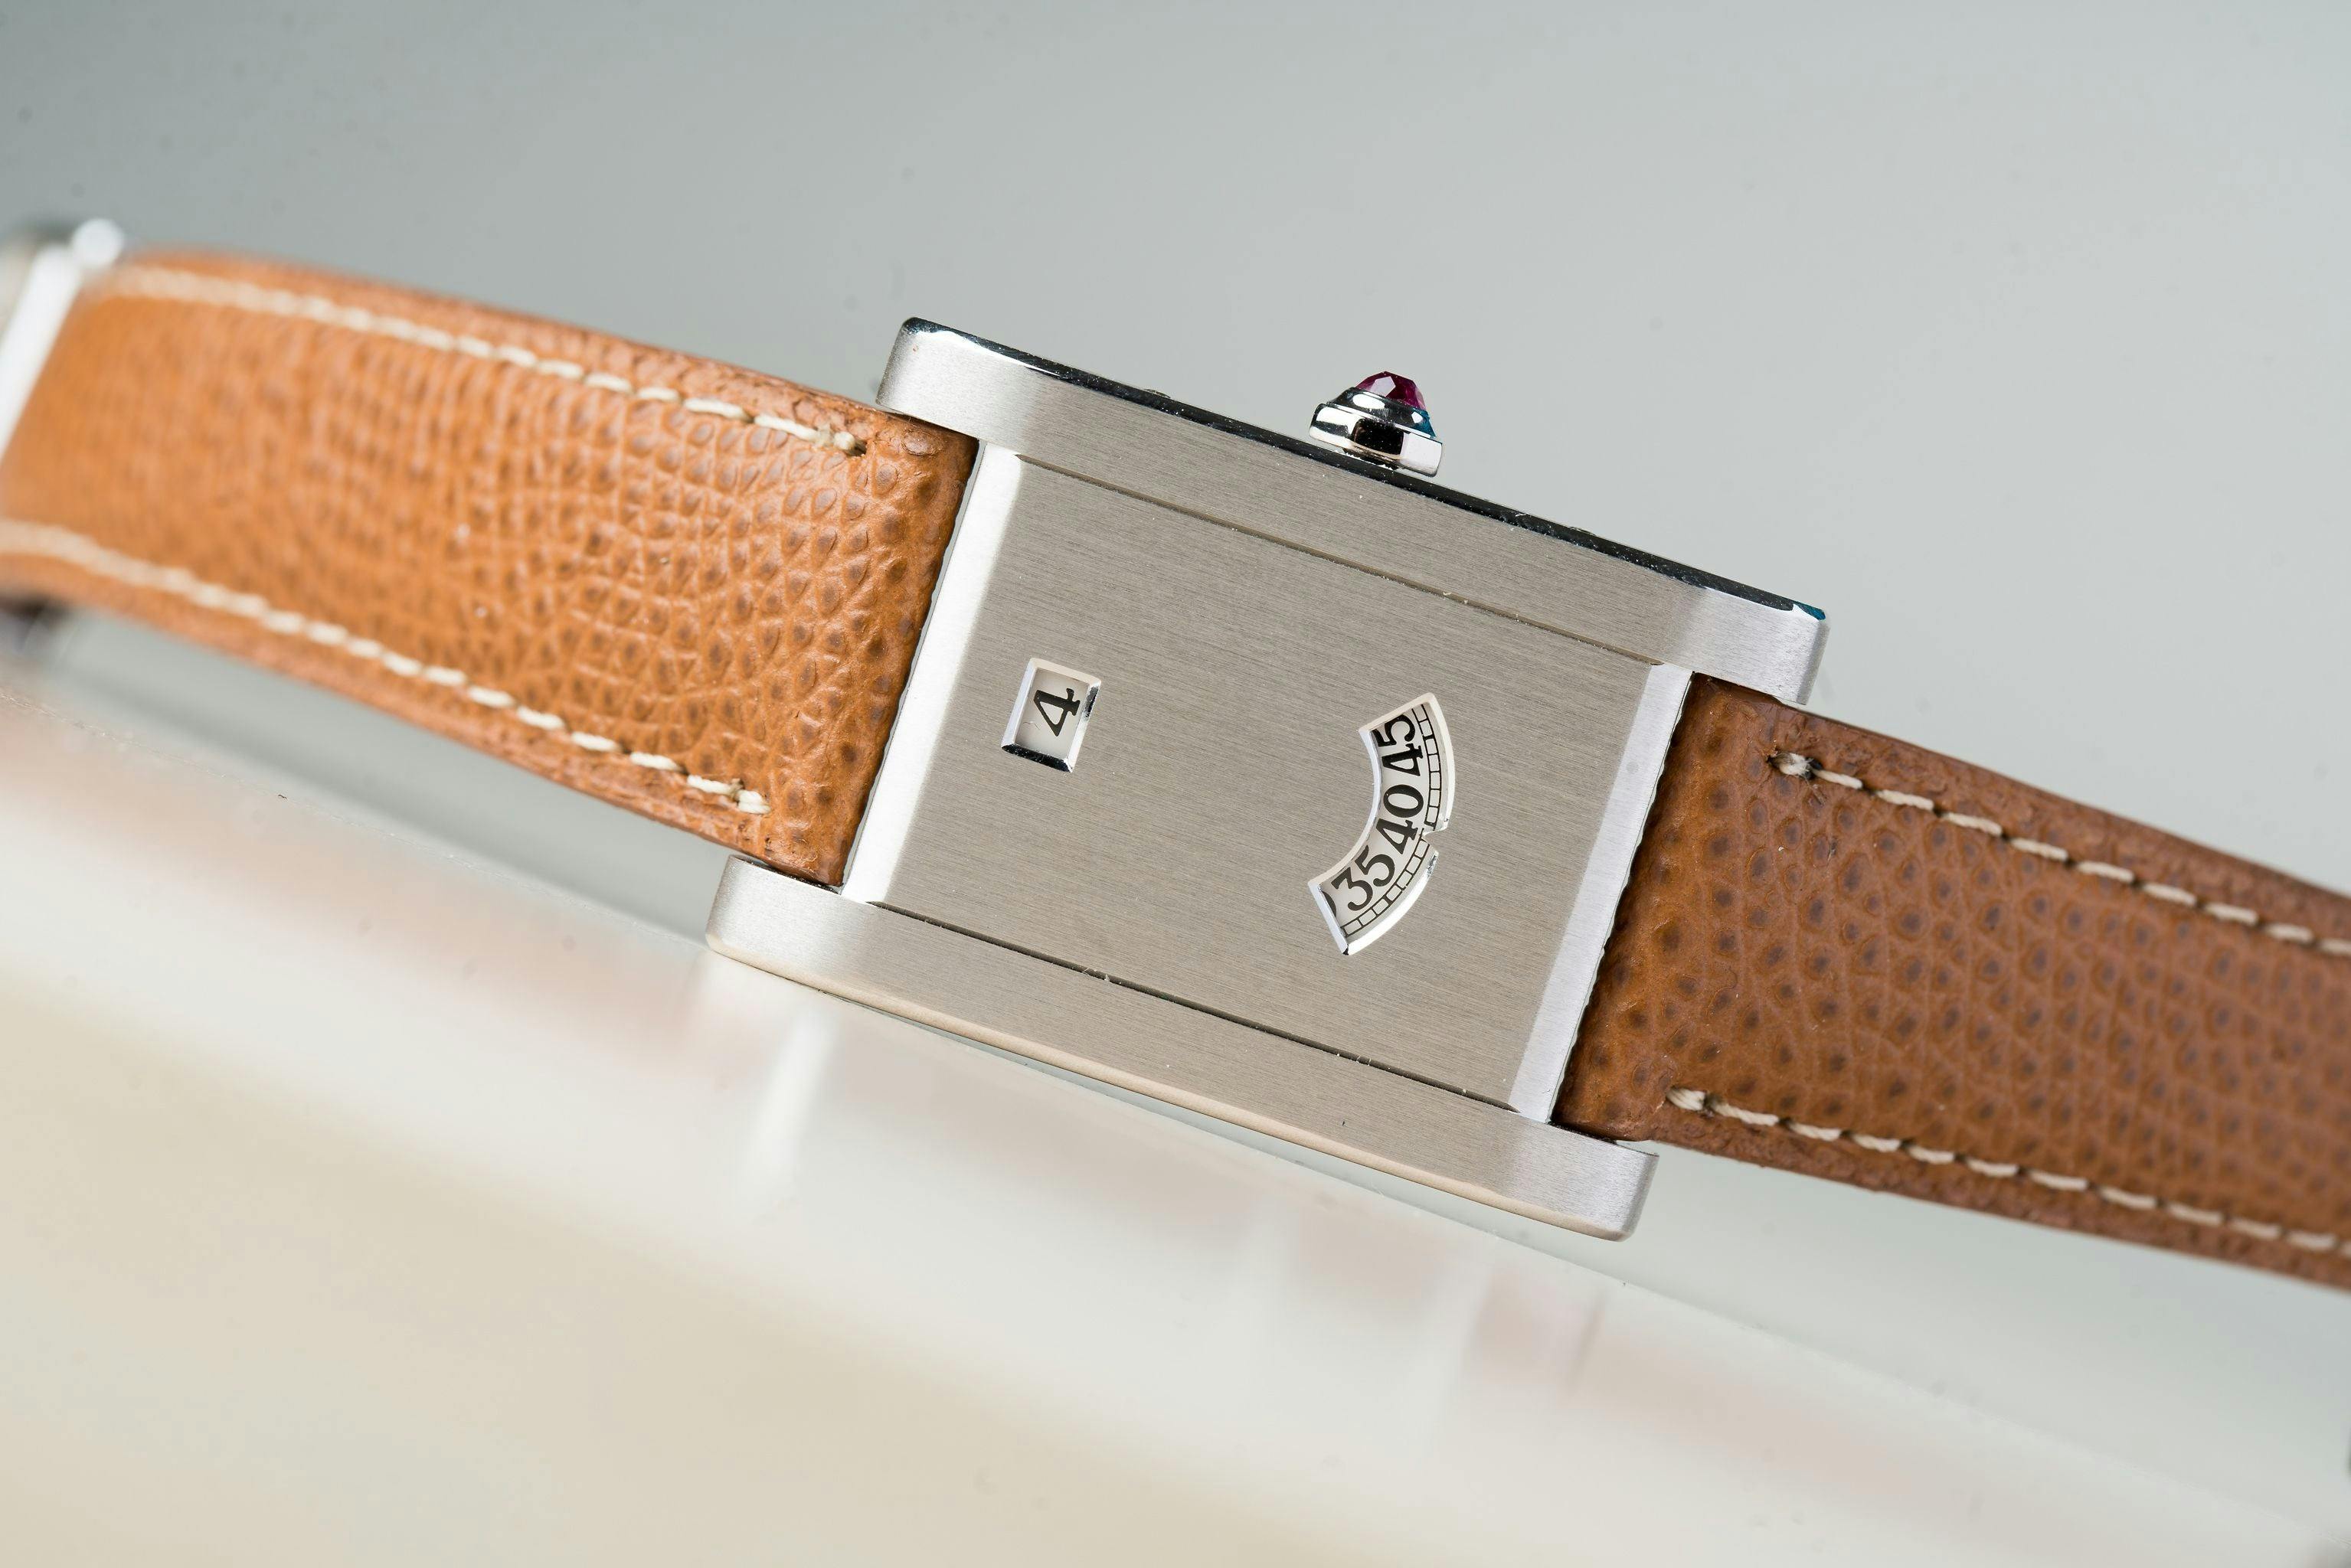 The Famous Cartier Tank A Guichet with the hours in one window and minutes in a curved window below. This is a reissue from the 1990s with the crown on the side. The original had the crown at the bottom of the case.